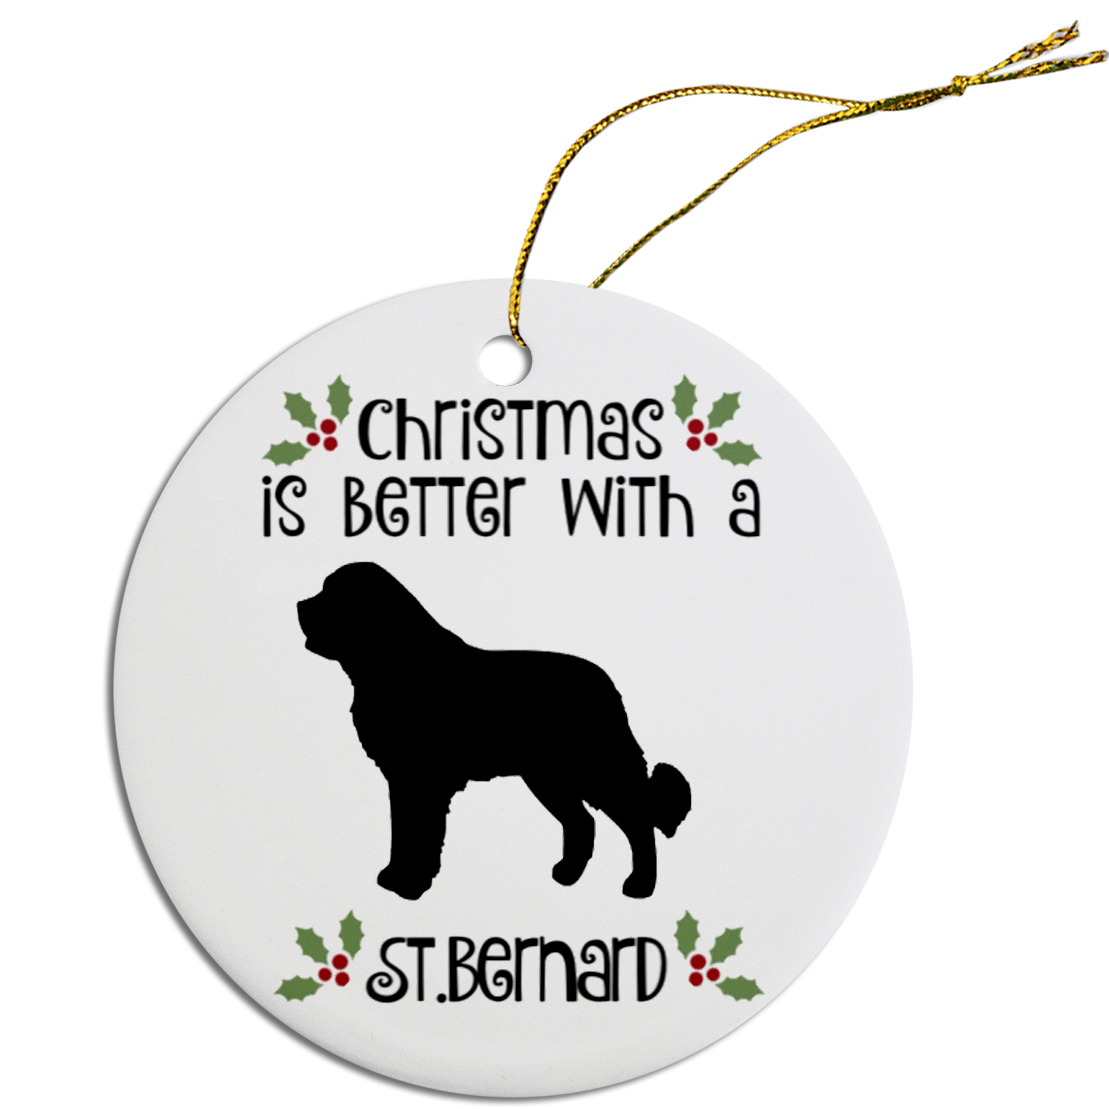 Picture of Mirage Pet ORN-R-B72 Breed Specific Round Christmas Ornament - St Bernard